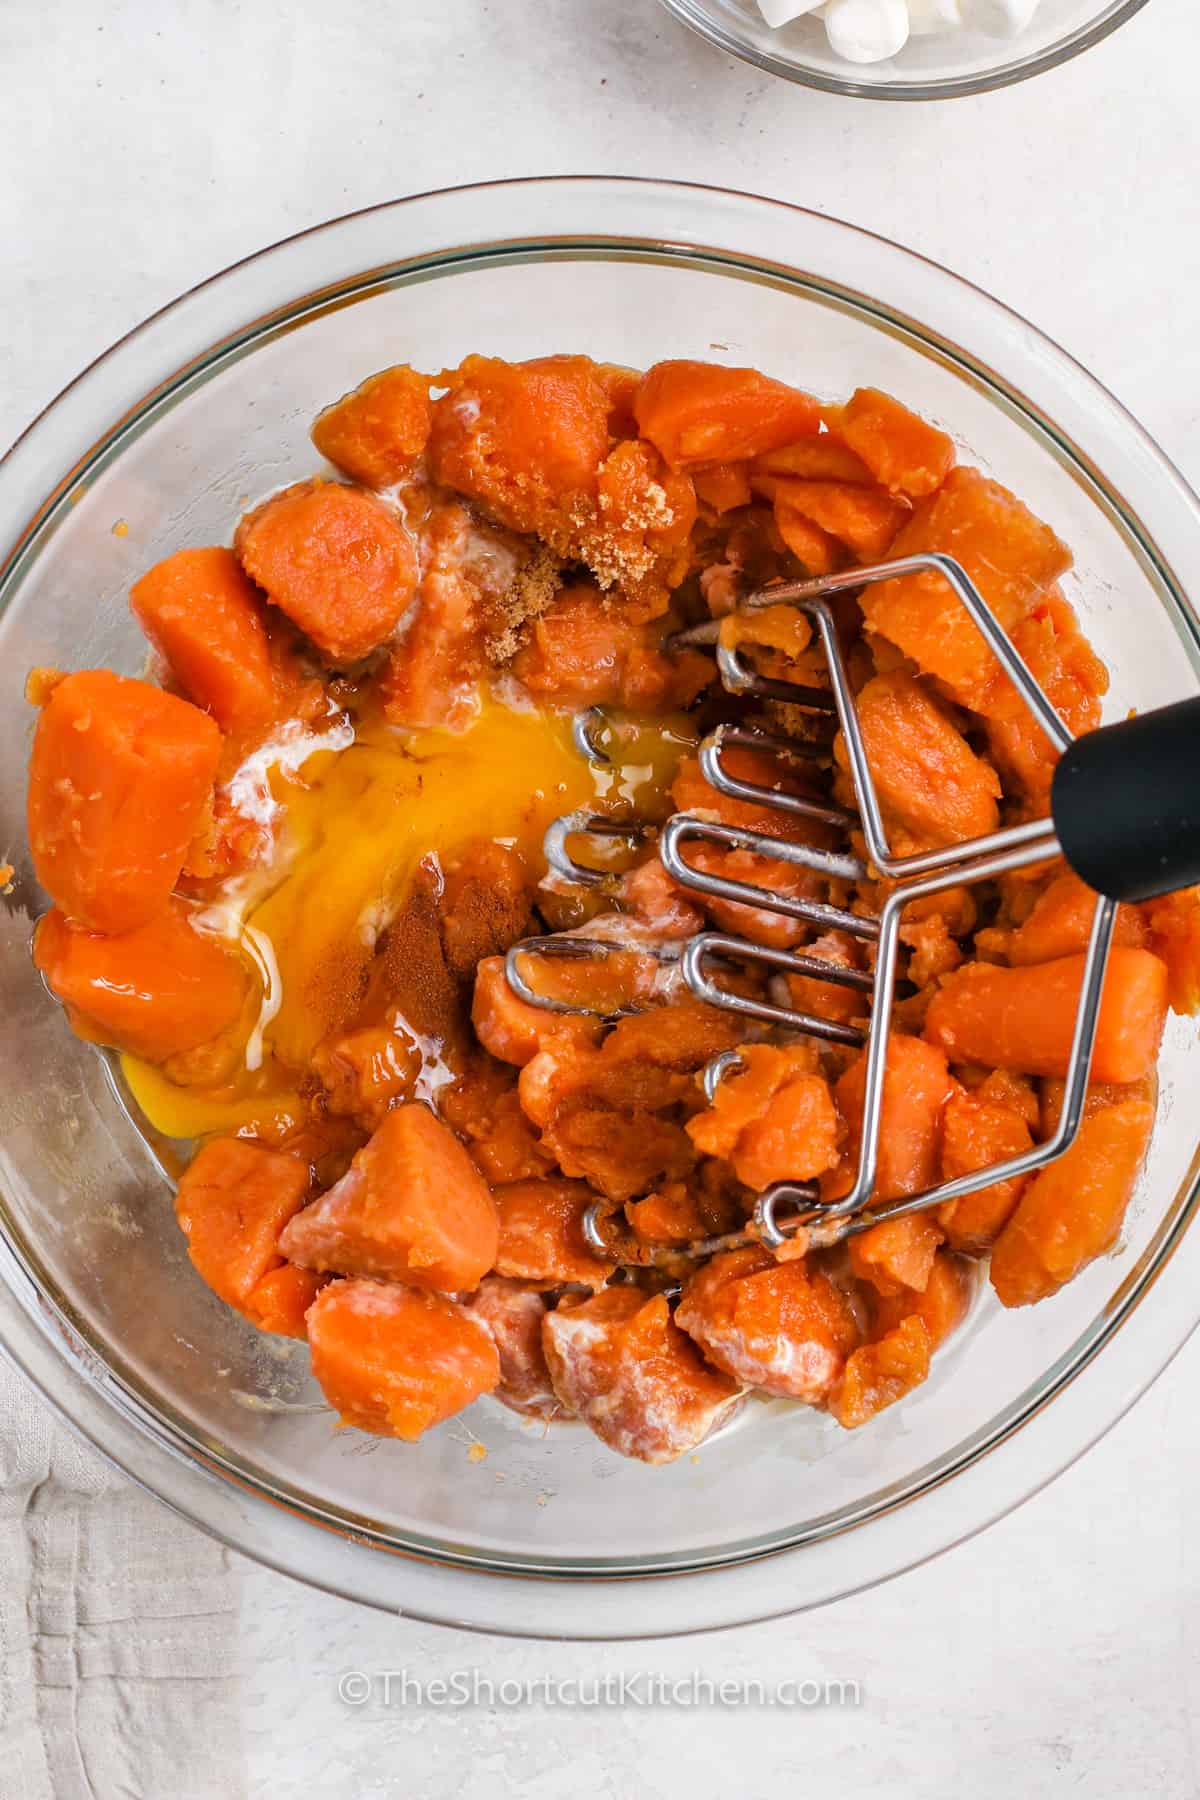 mashing ingredients together to make Canned Sweet Potato Casserole